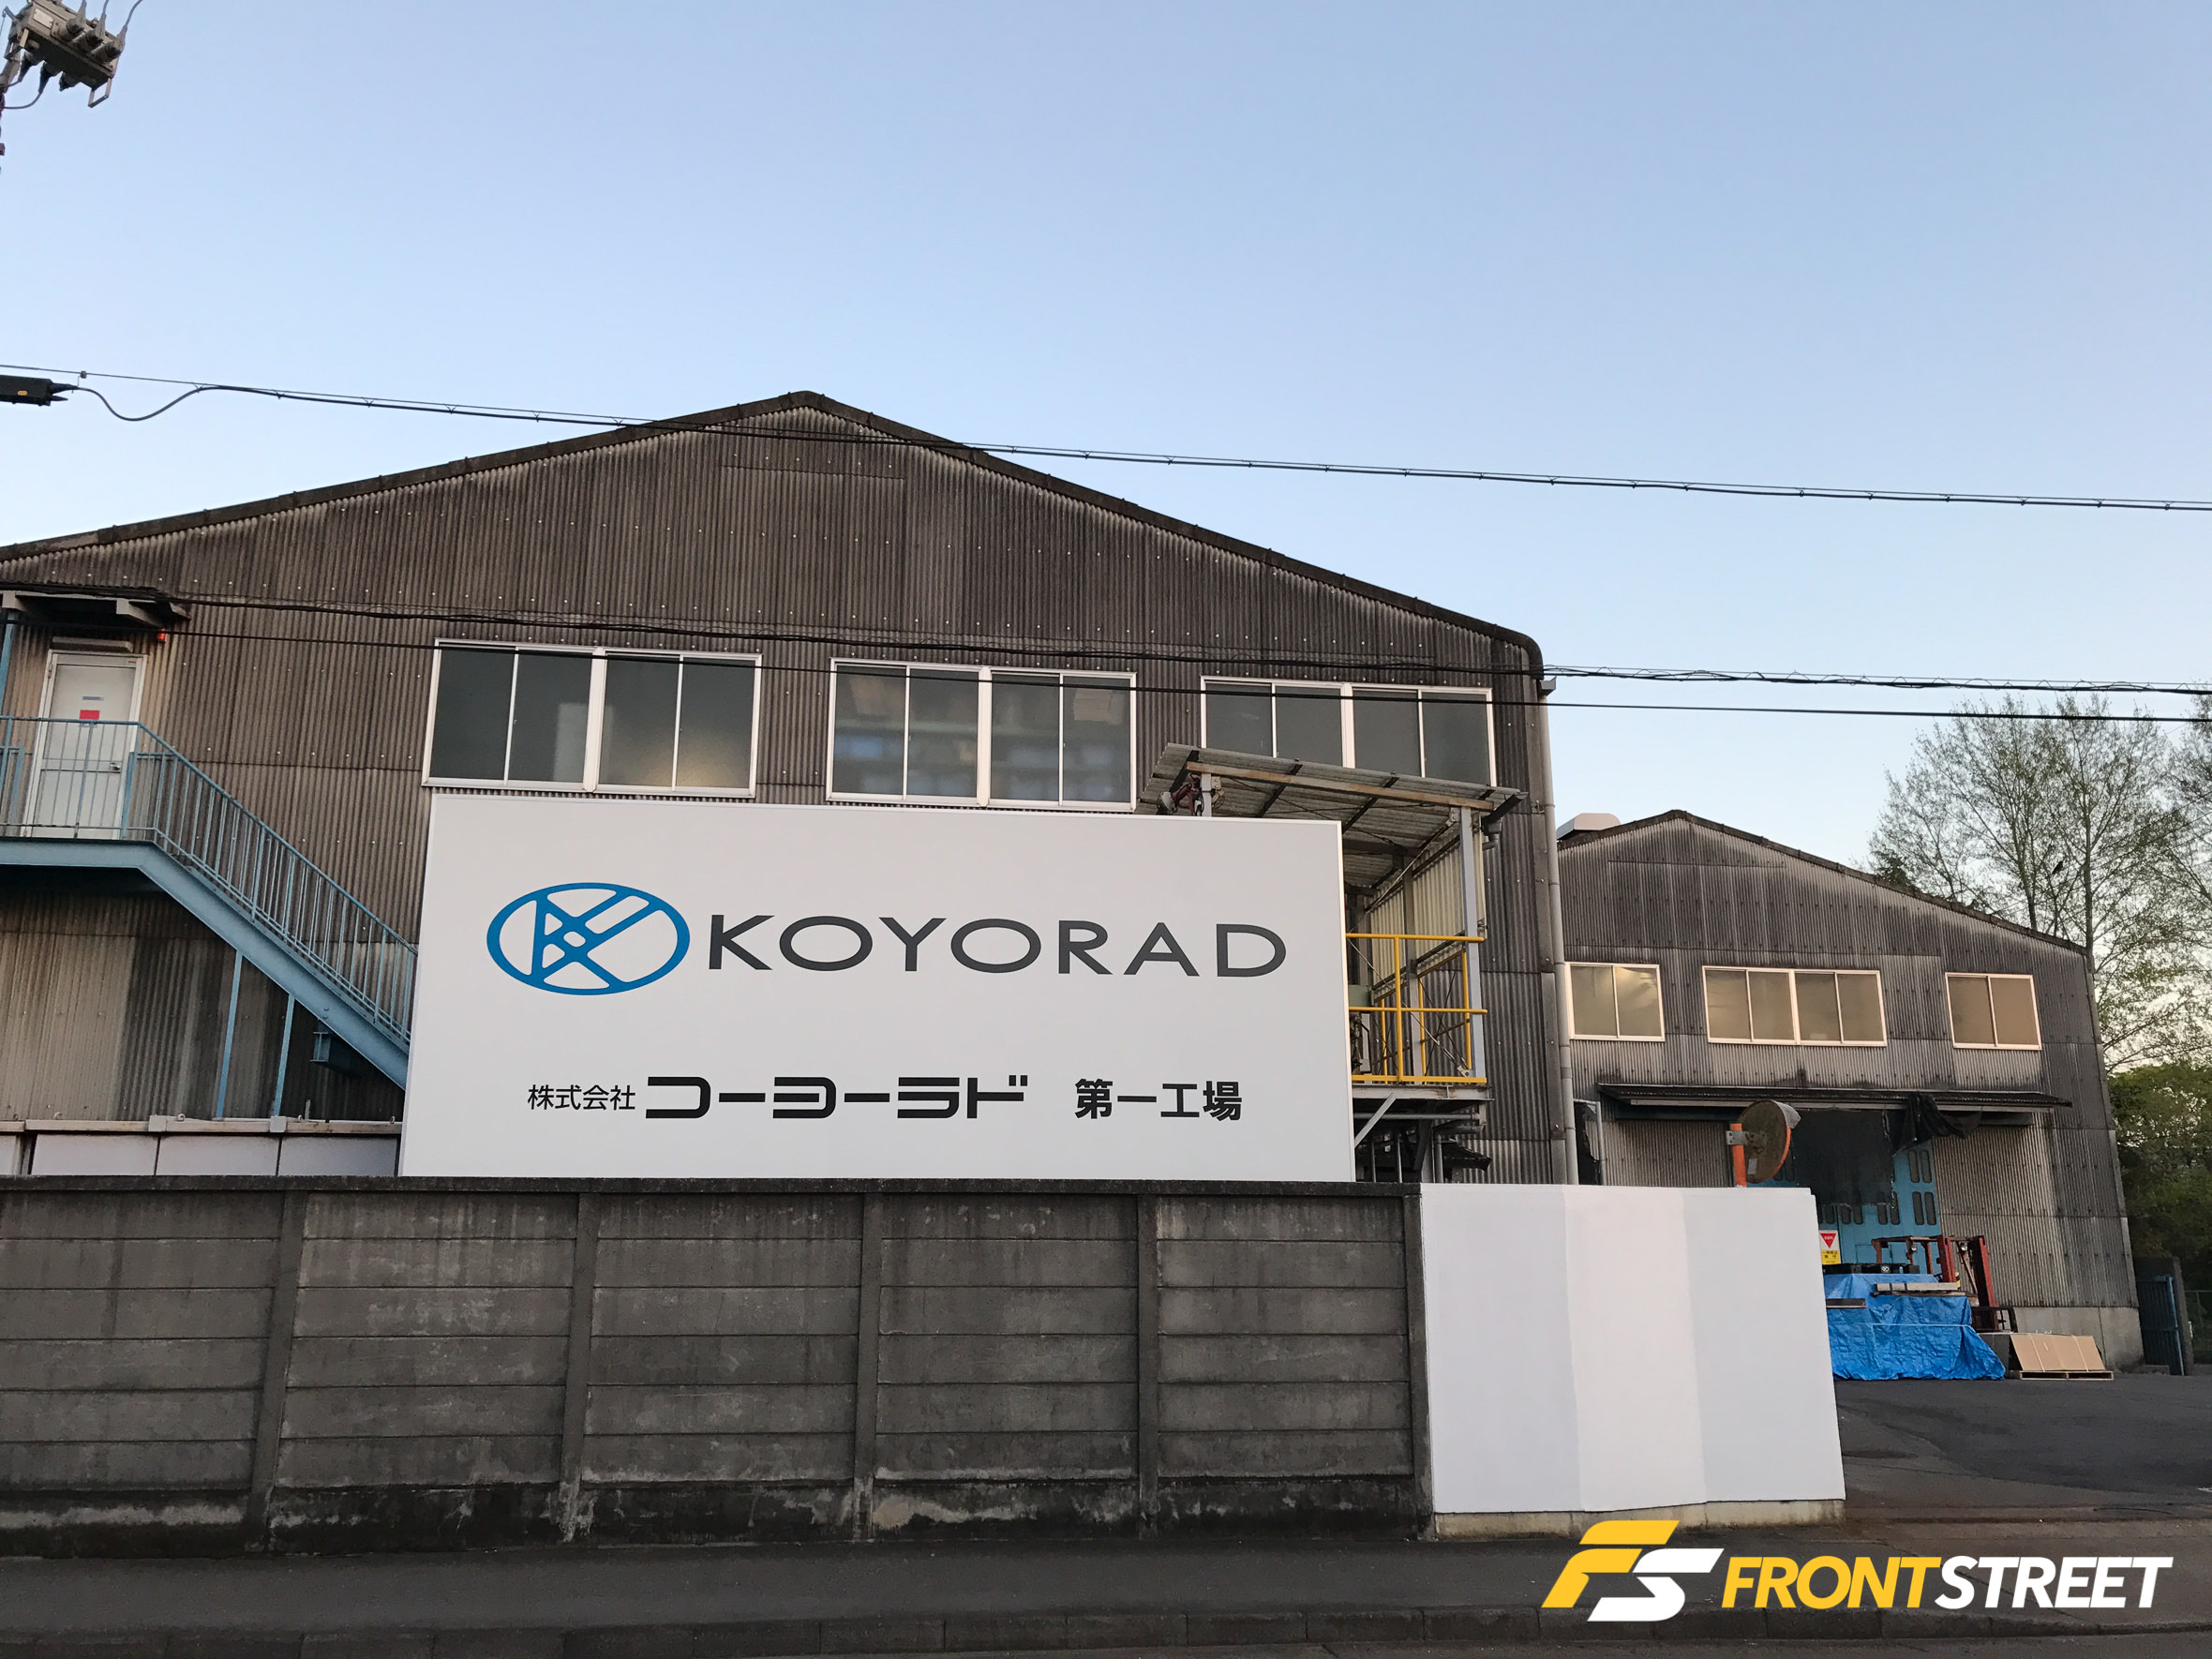 Origins: The History Of Koyorad And Its Name